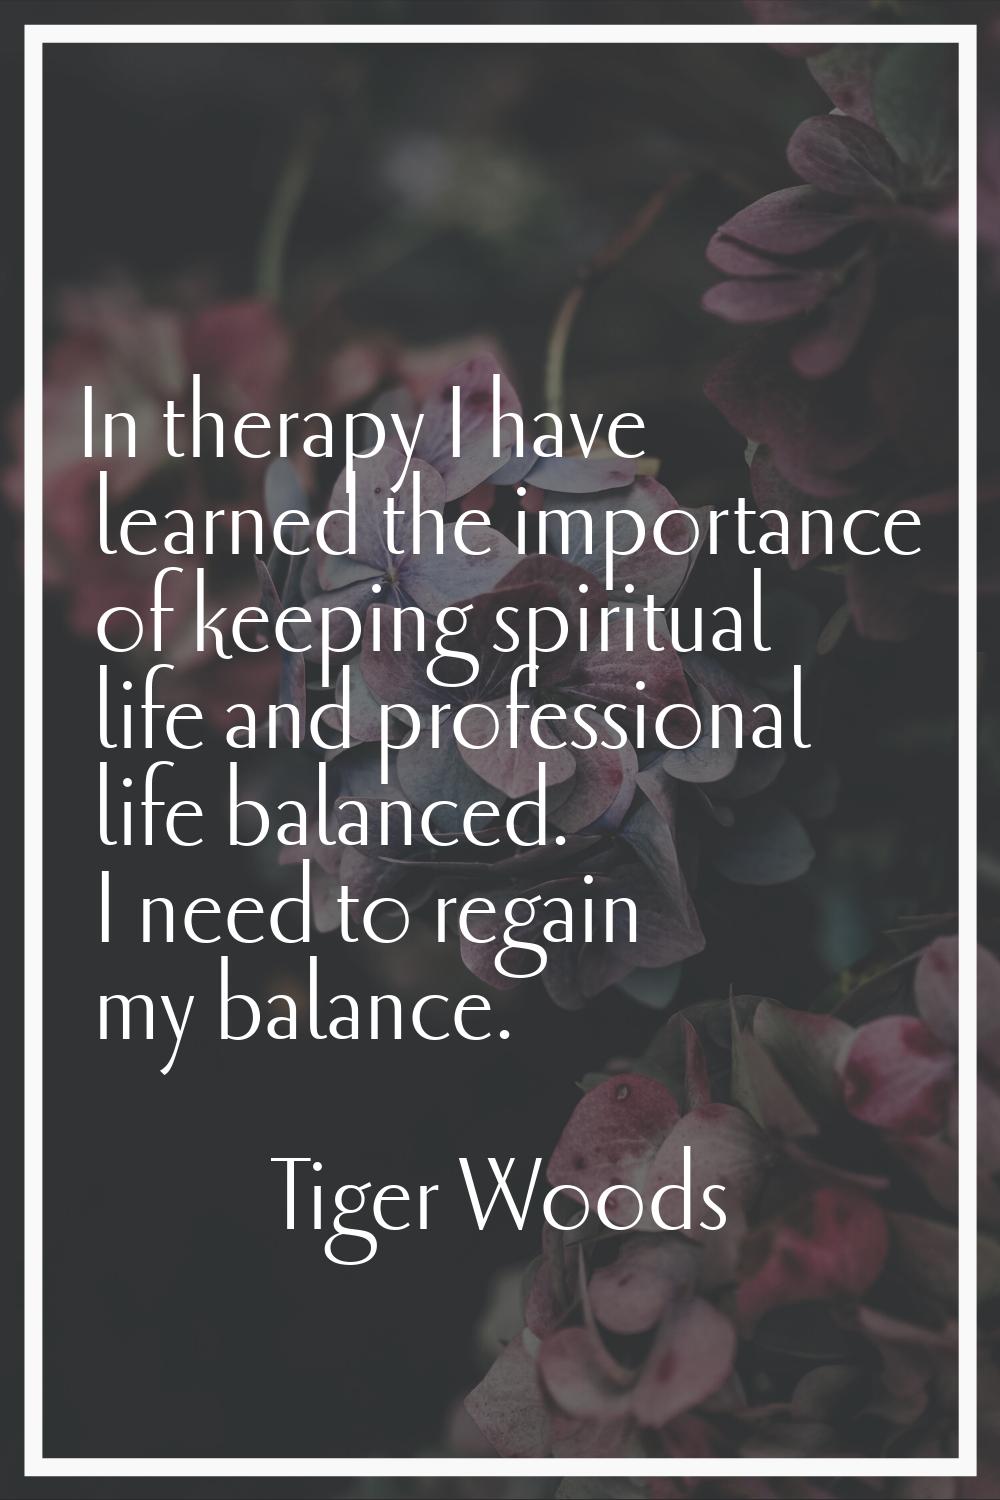 In therapy I have learned the importance of keeping spiritual life and professional life balanced. 